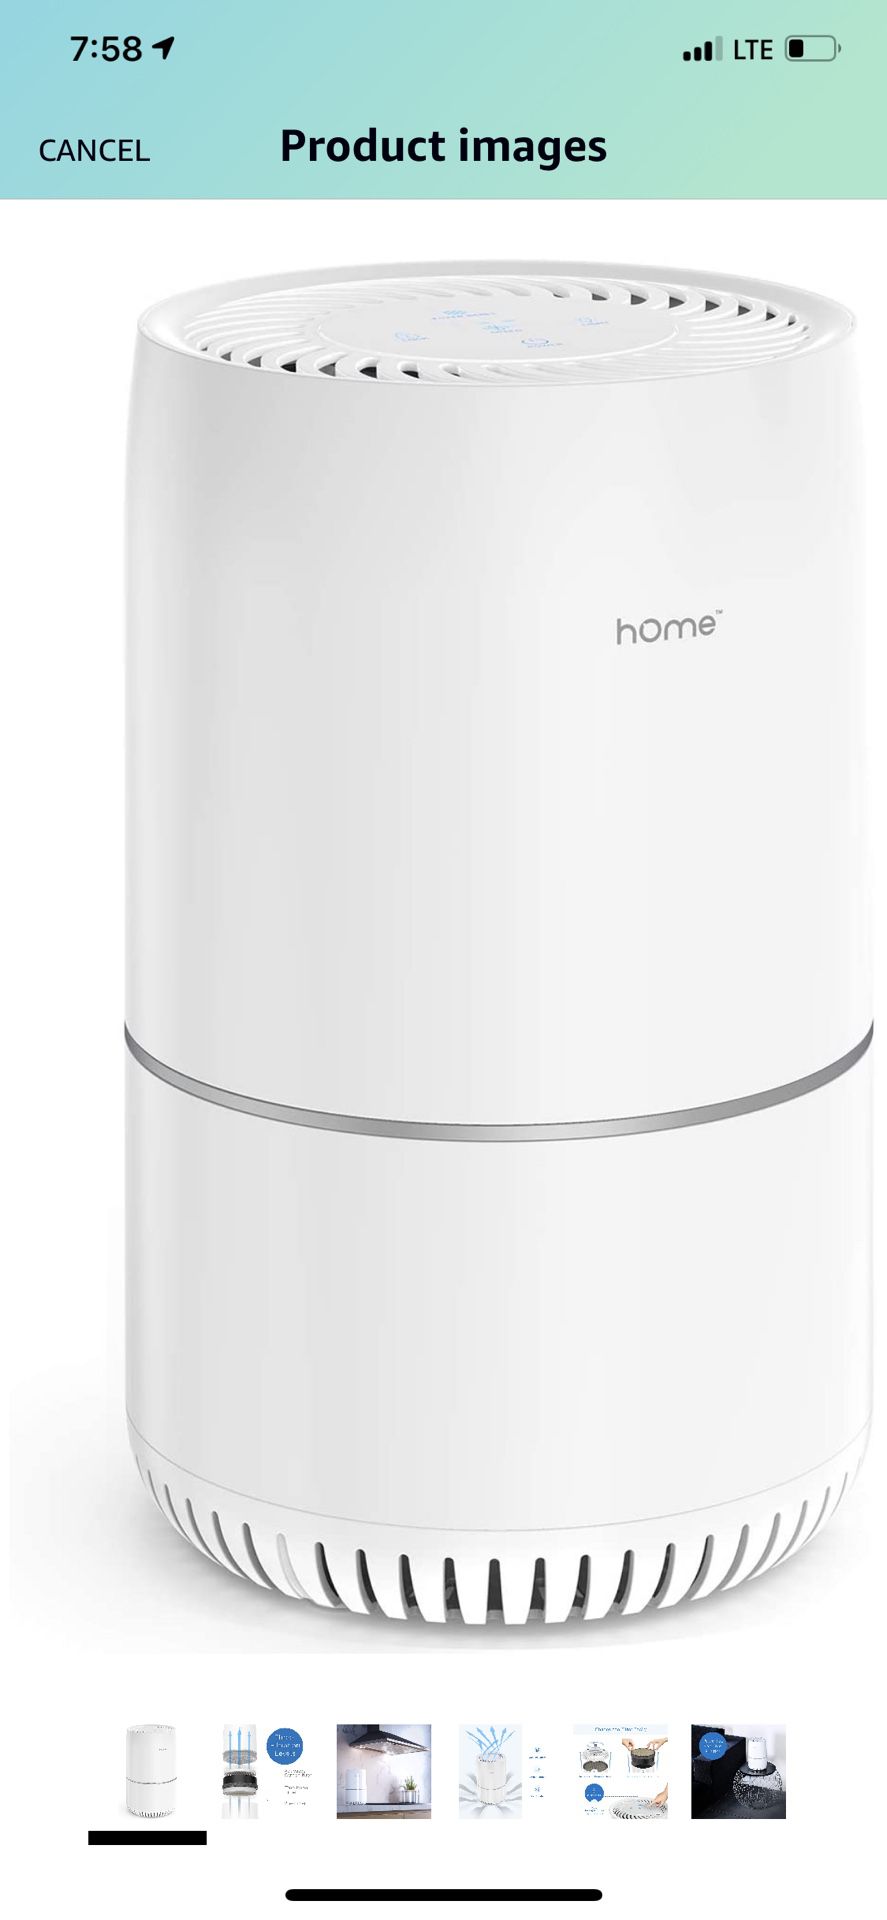 hOmeLabs Purely Awesome Air Purifier with True HEPA Filter - Removes 99.97% of Airborne Particles with H13, Activated Carbon and 3-Stage Filtration to